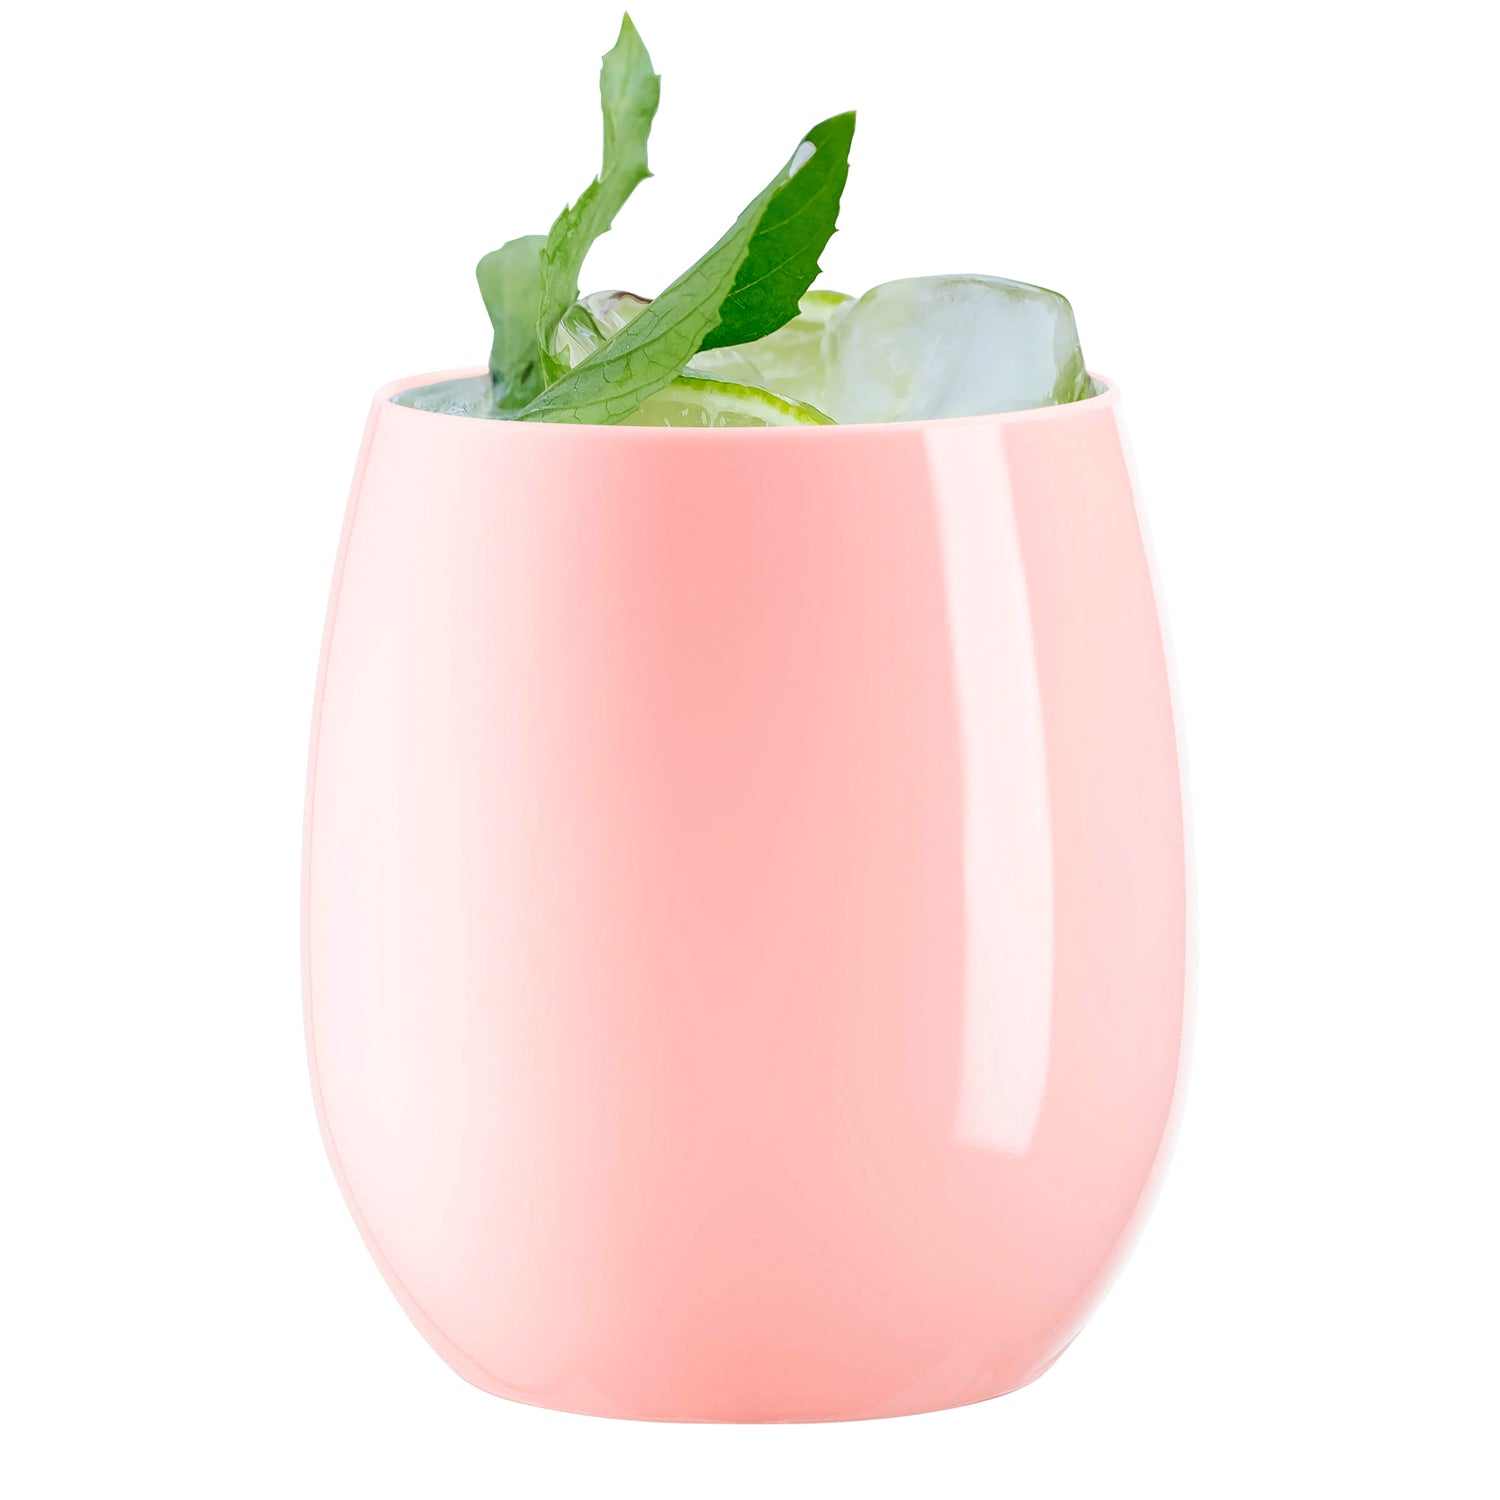 12 oz. Solid Pink Elegant Stemless Plastic Wine Glasses Secondary | The Kaya Collection